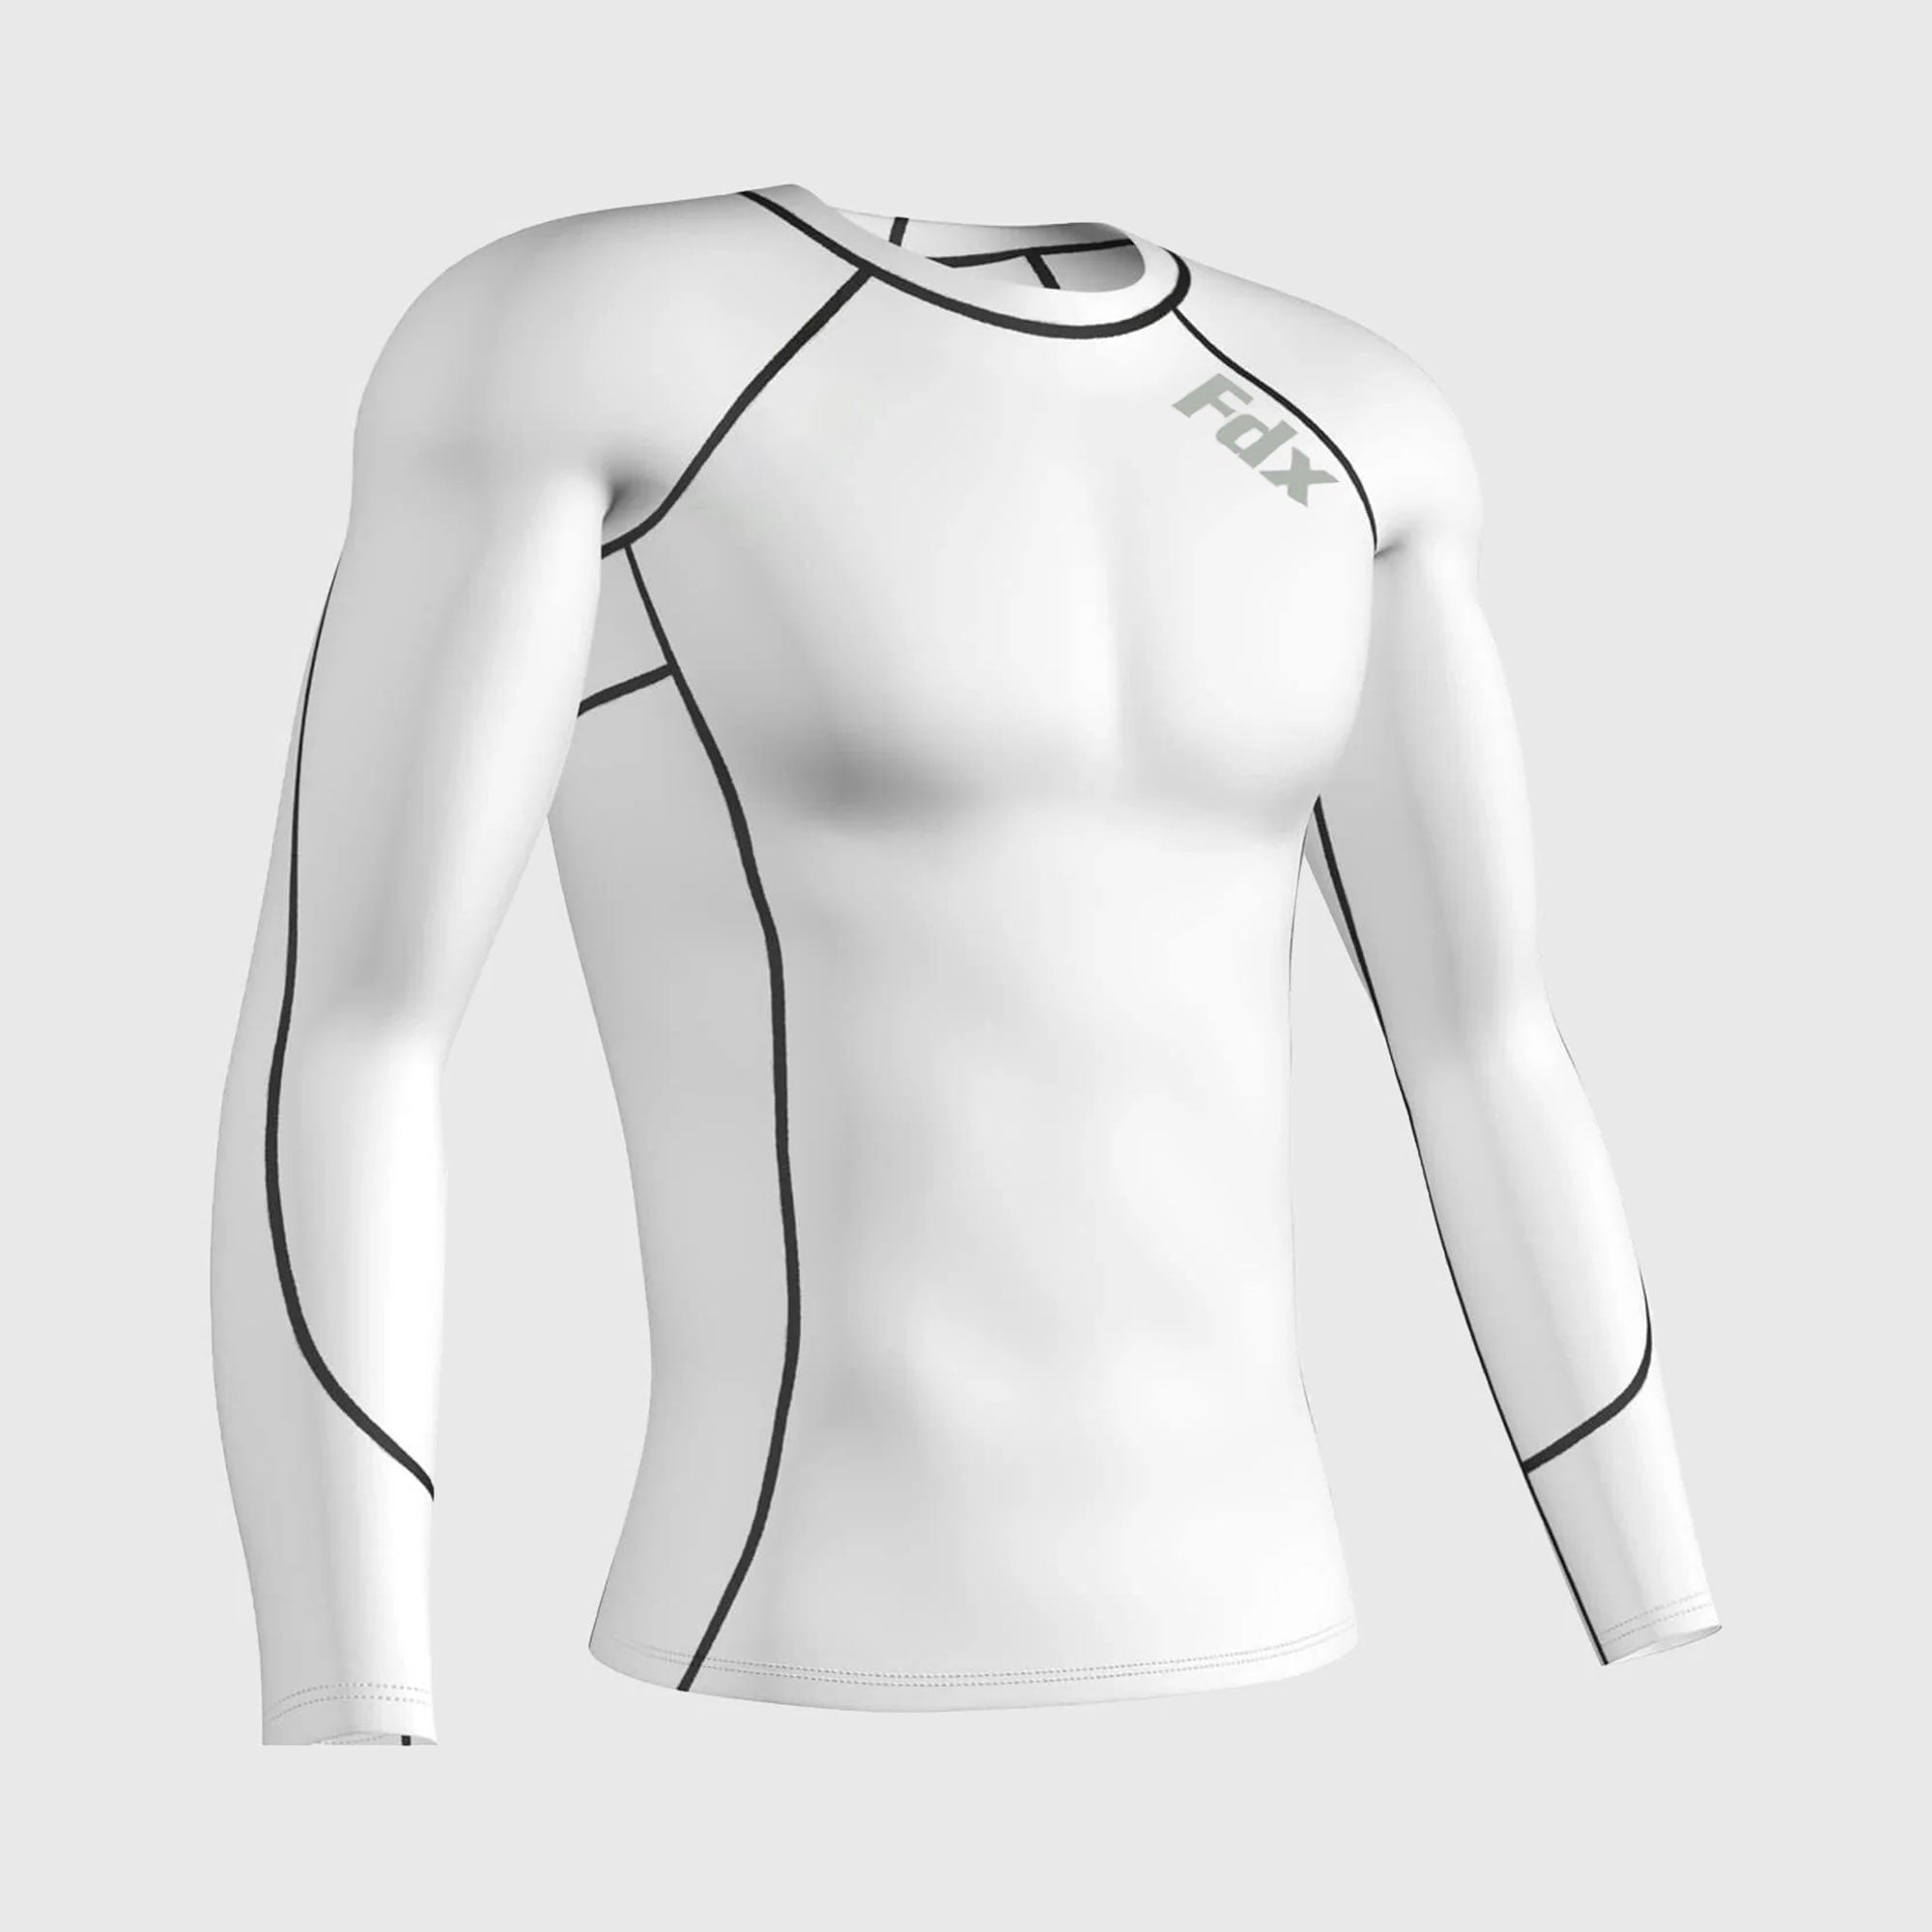 Fdx Cosmic White Men's Compression Thermal Winter Base Layer Shirt